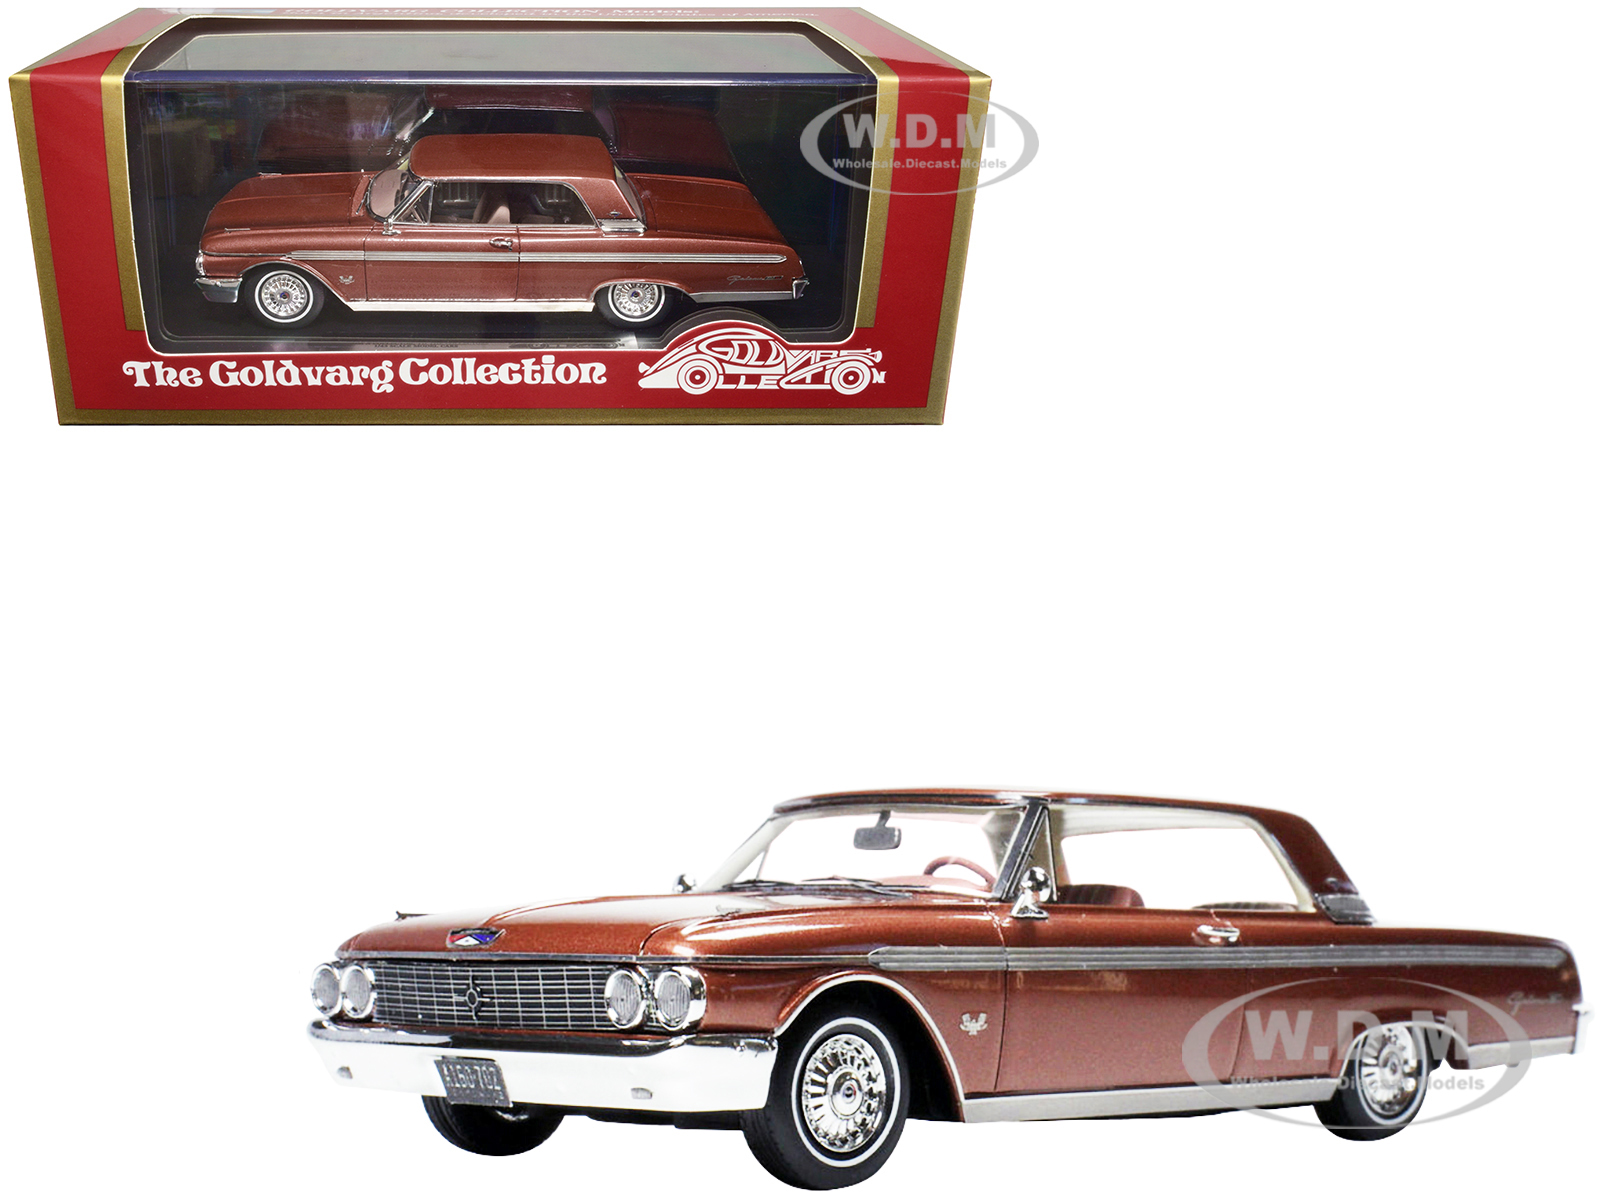 1962 Ford Galaxie Chestnut Brown Metallic Limited Edition to 210 pieces Worldwide 1/43 Model Car by Goldvarg Collection